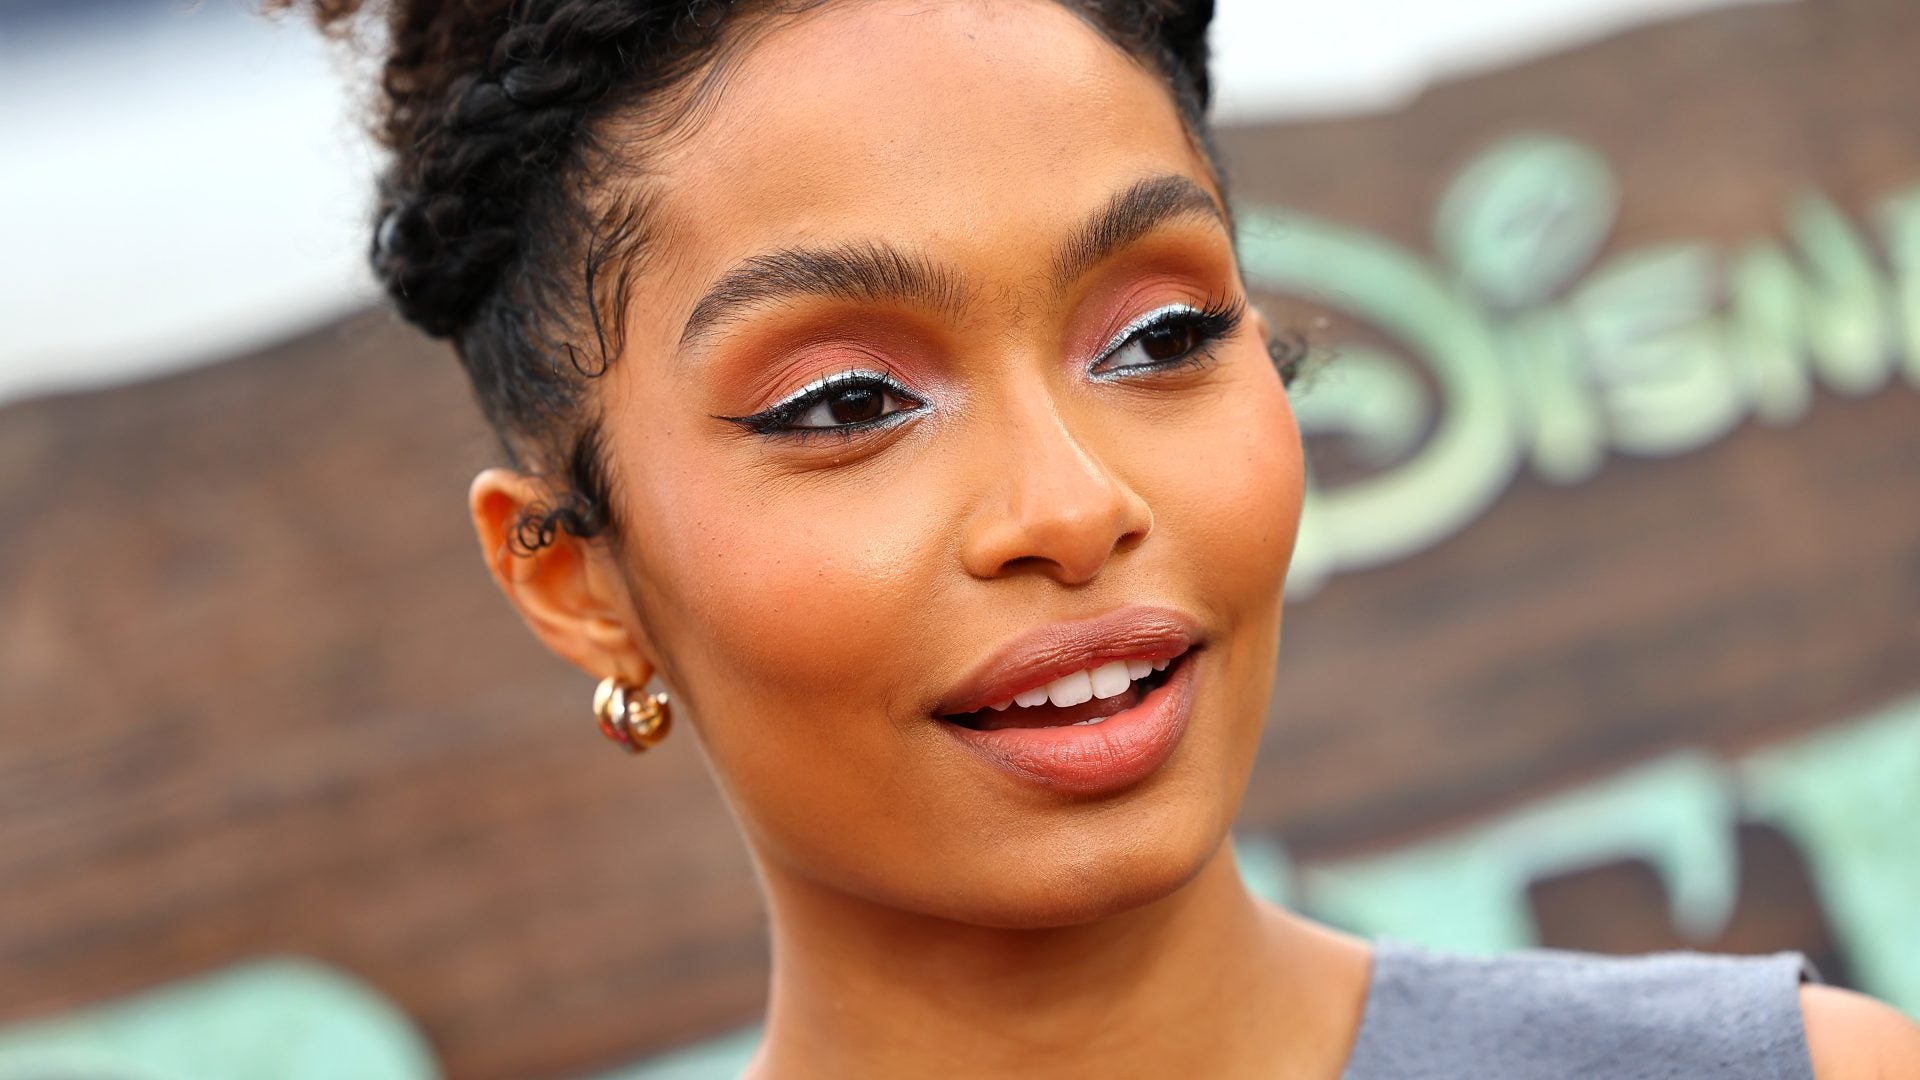 Harvard Grad Yara Shahidi Says 'College Provided A Safe Space To Do A Lot Of Growing Up'